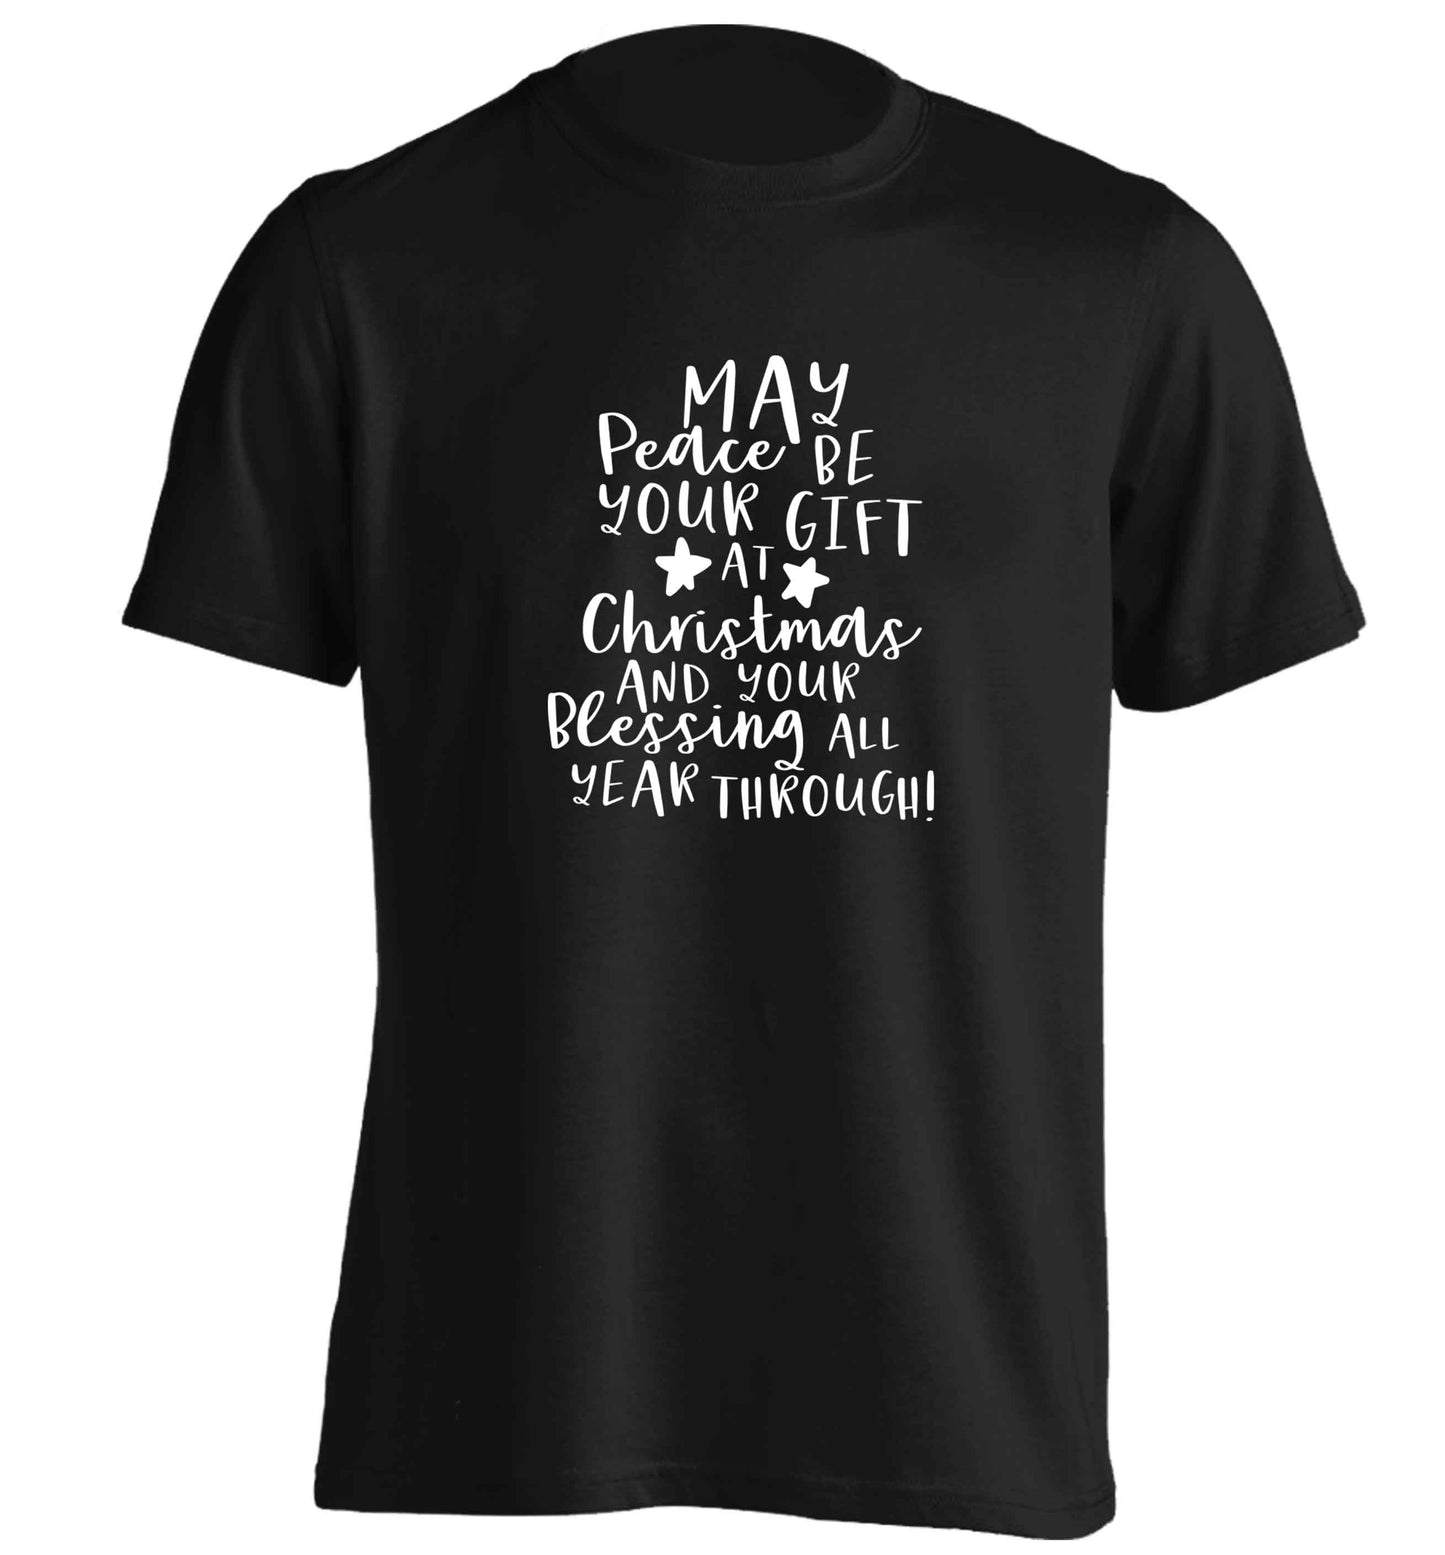 Peace be your Gift at Christmas Gift adults unisex black Tshirt 2XL